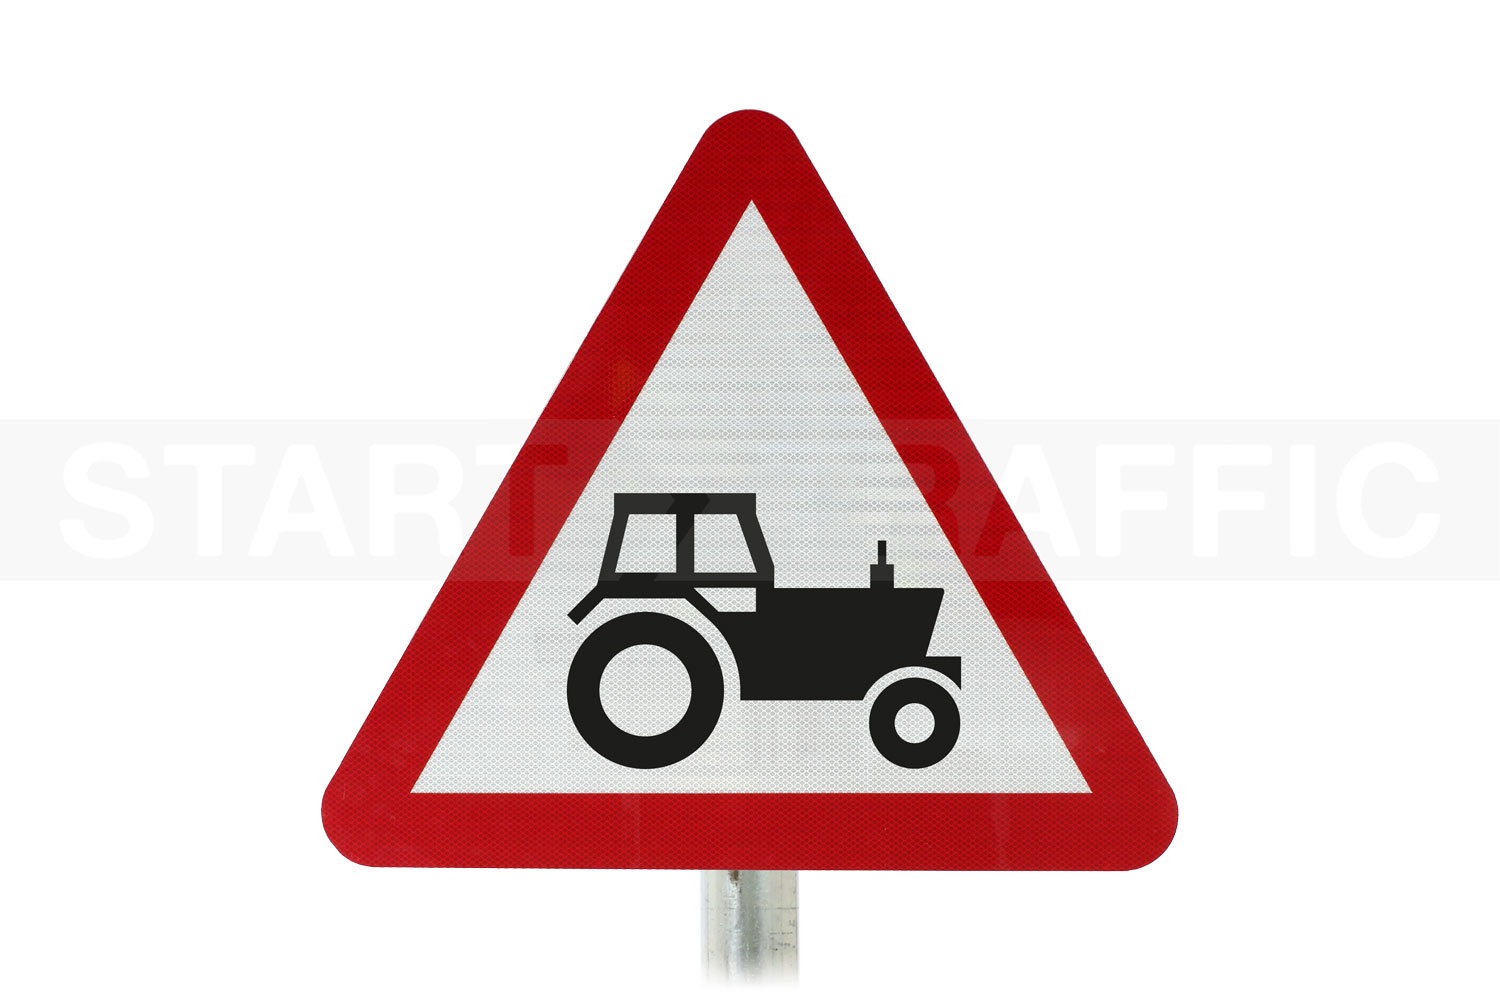 FARM SIGN TRACTORS TURNING SIGN WARNING TRACTOR SIGN FARM ROAD SAFETY SIGN 